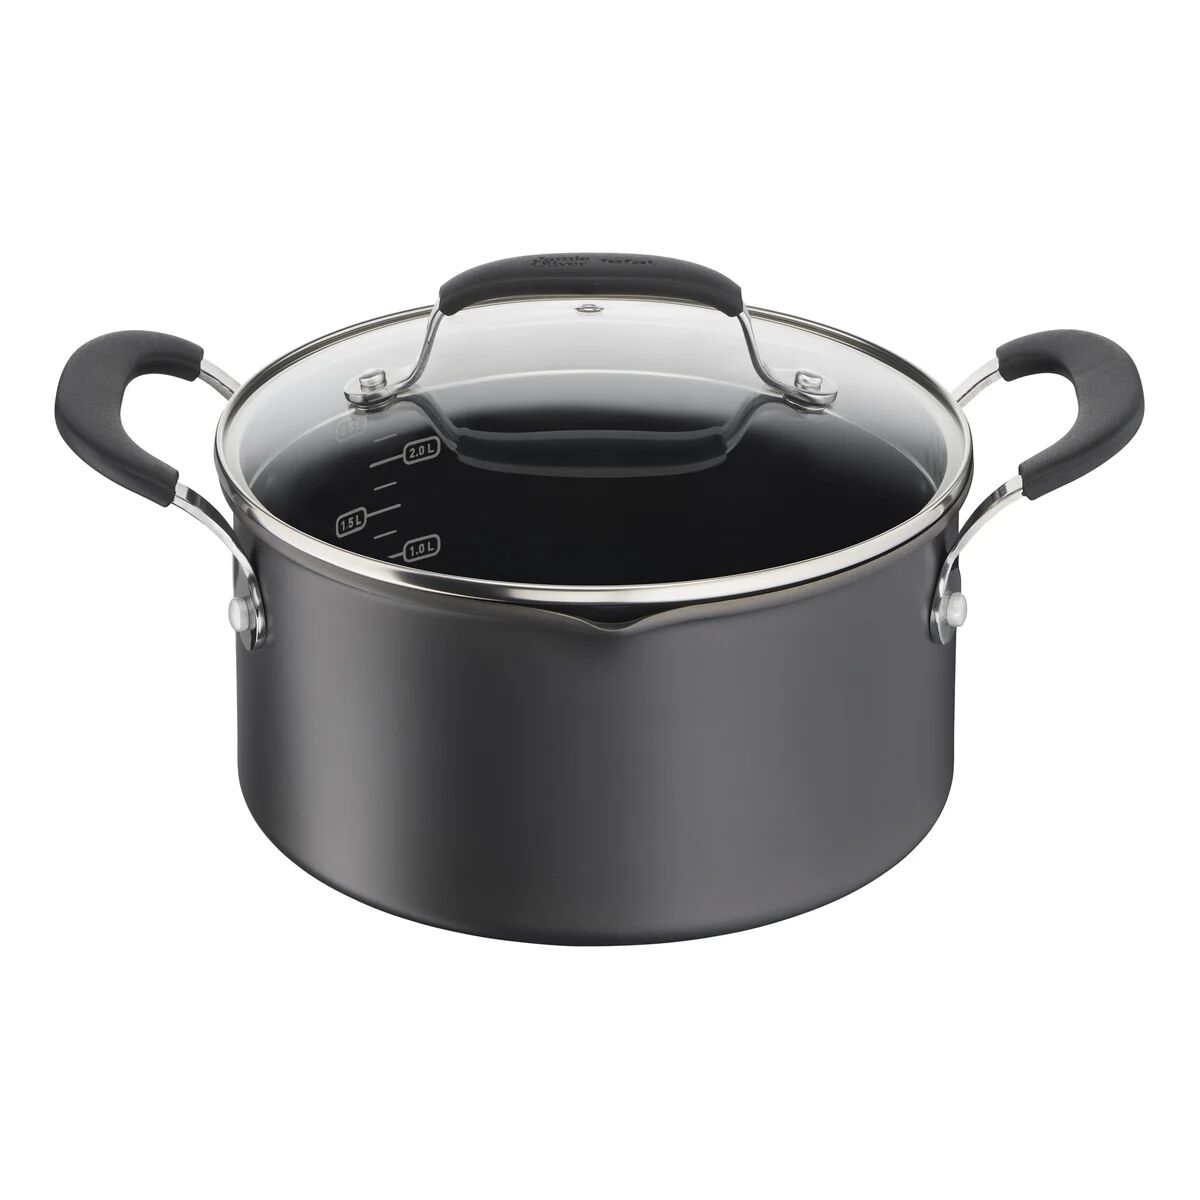 Tefal Jamie Oliver Quick & Easy gryte hard anodised 5,2 L